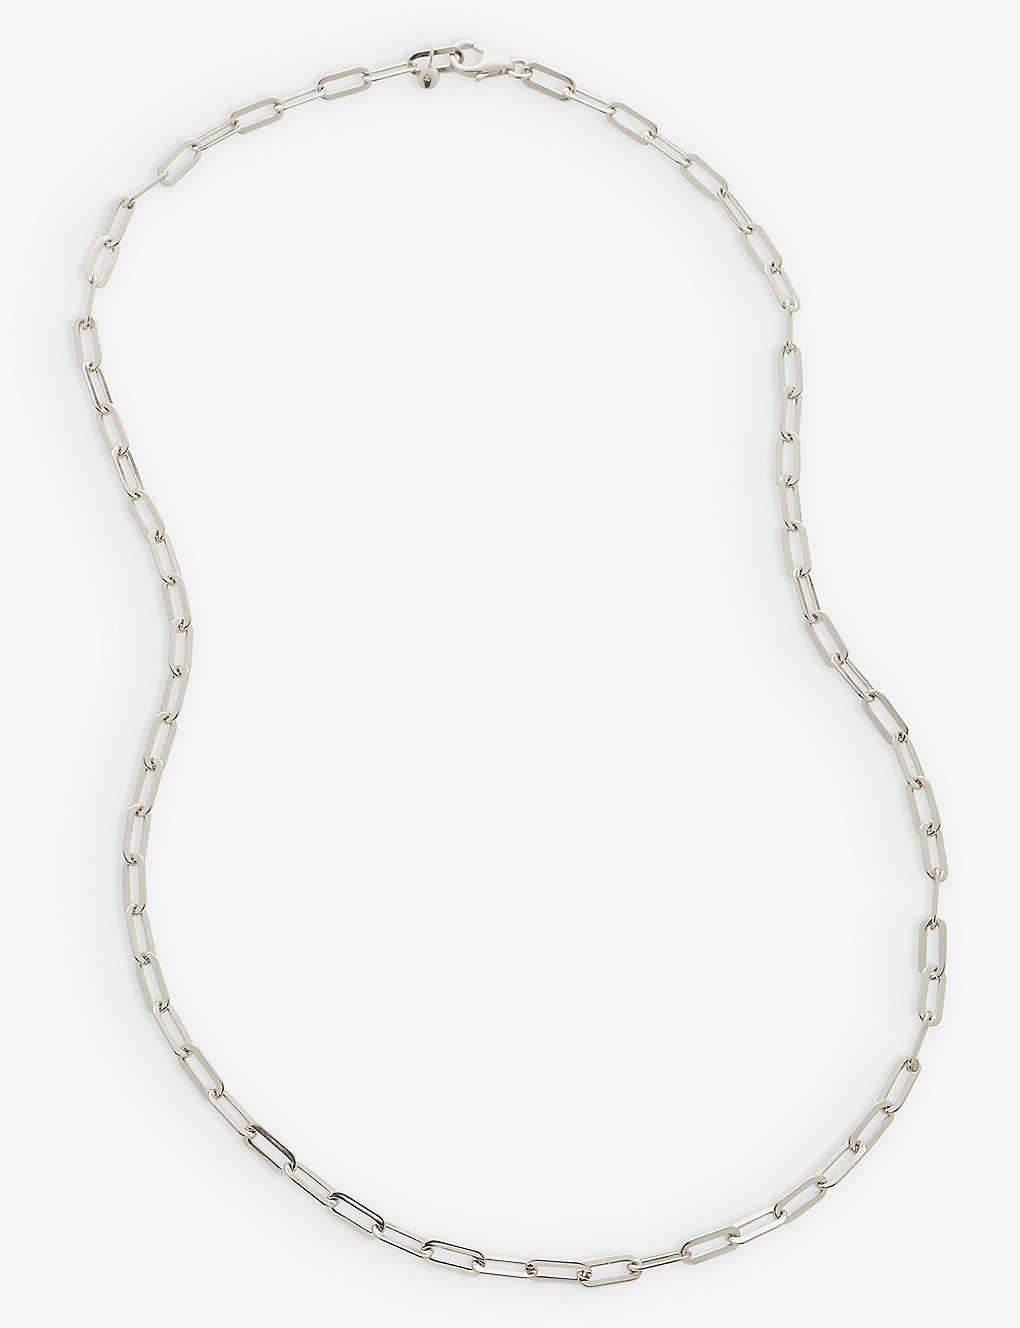 MONICA VINADER MONICA VINADER WOMEN'S SILVER PAPERCLIP-CHAIN STERLING-SILVER NECKLACE,65443409